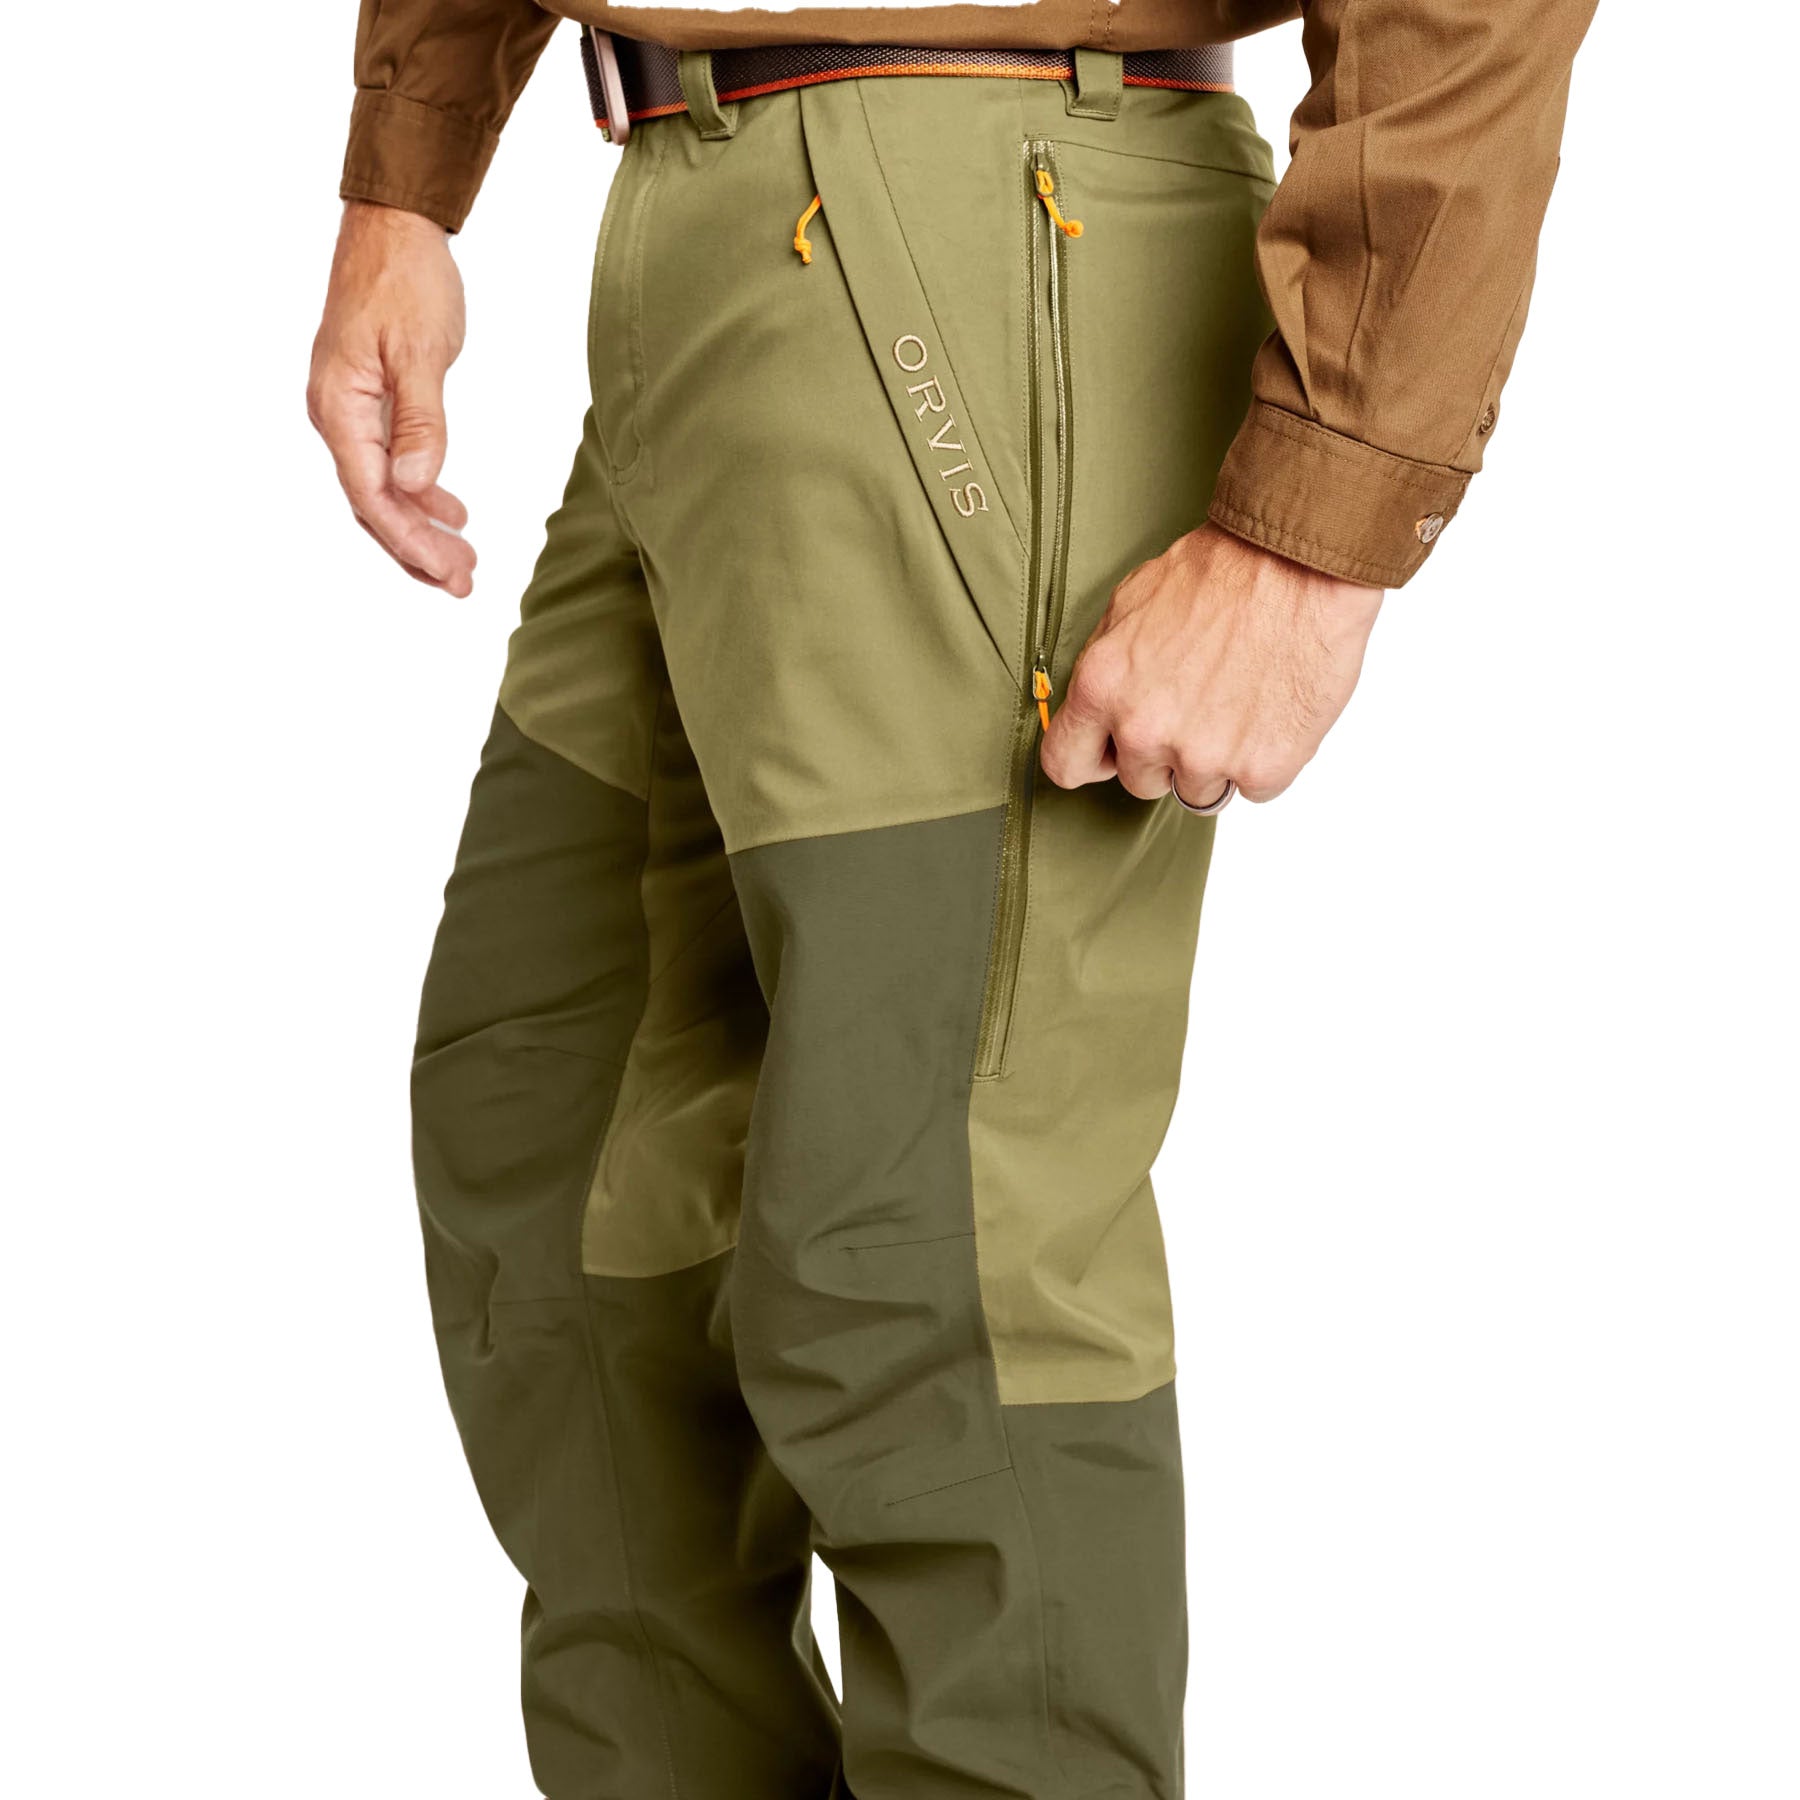 Buy Orvis Pants Size 10 W33xl31.5 Orvis Cargo Pants Orvis Outdoor Tactical  Pants Multi Pockets Pants Online in India - Etsy